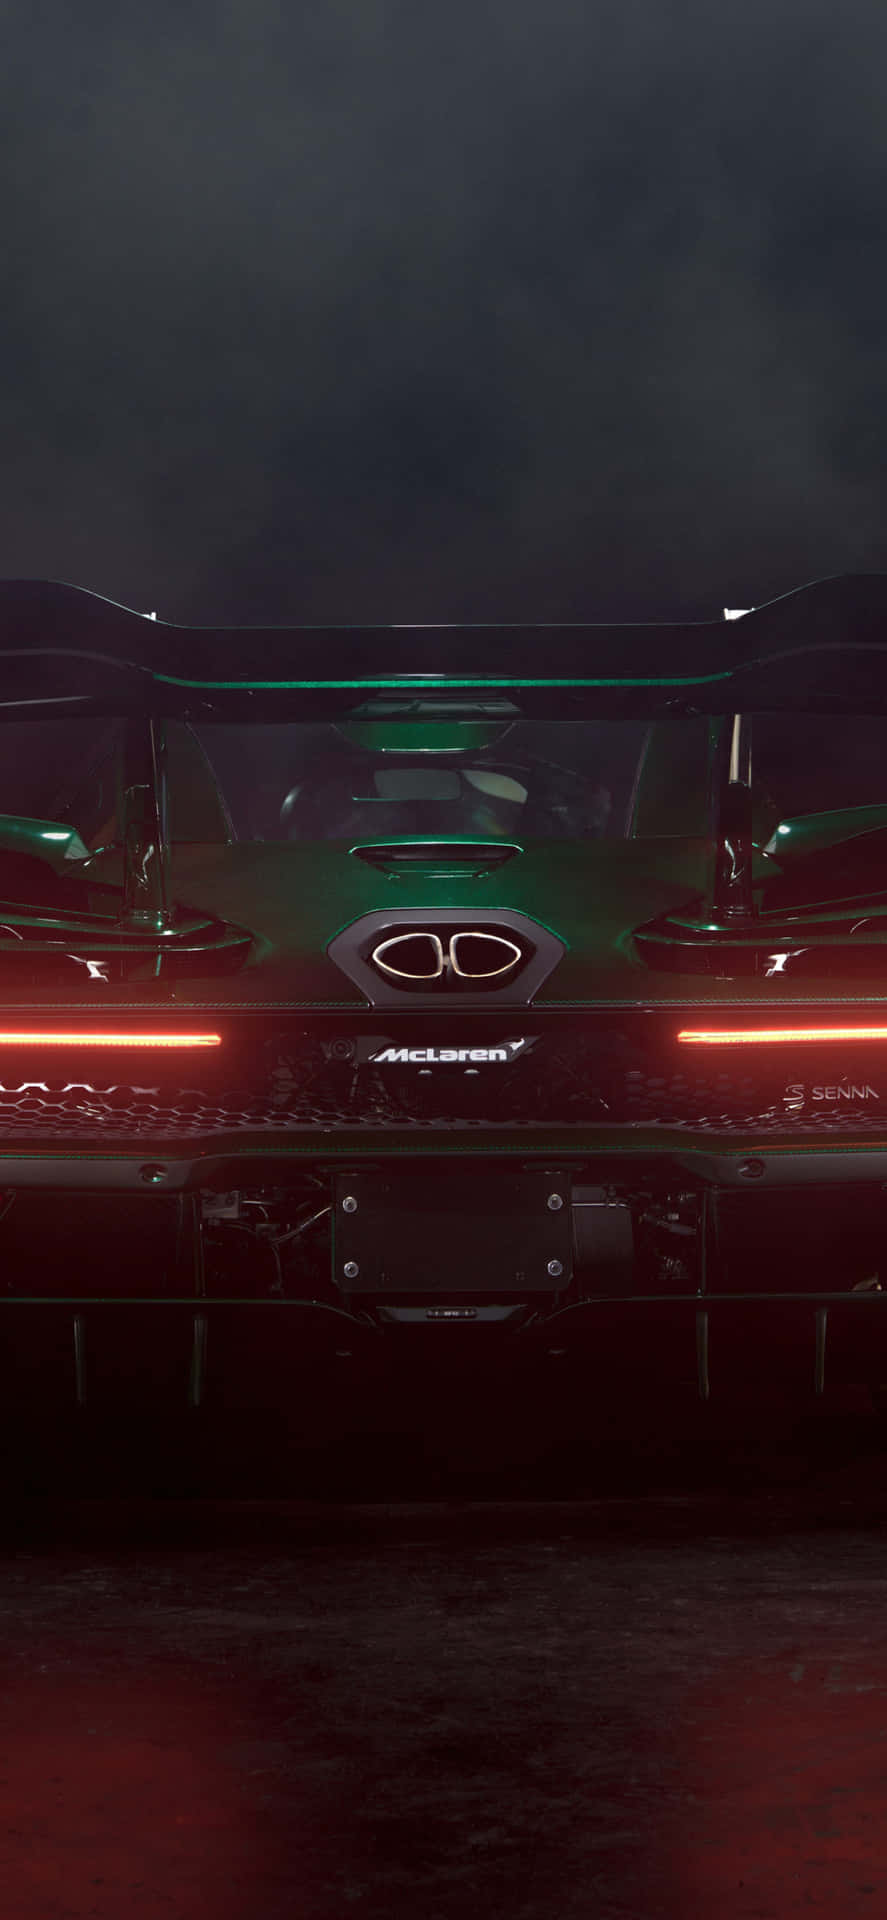 A Green Sports Car With Red Lights On The Back